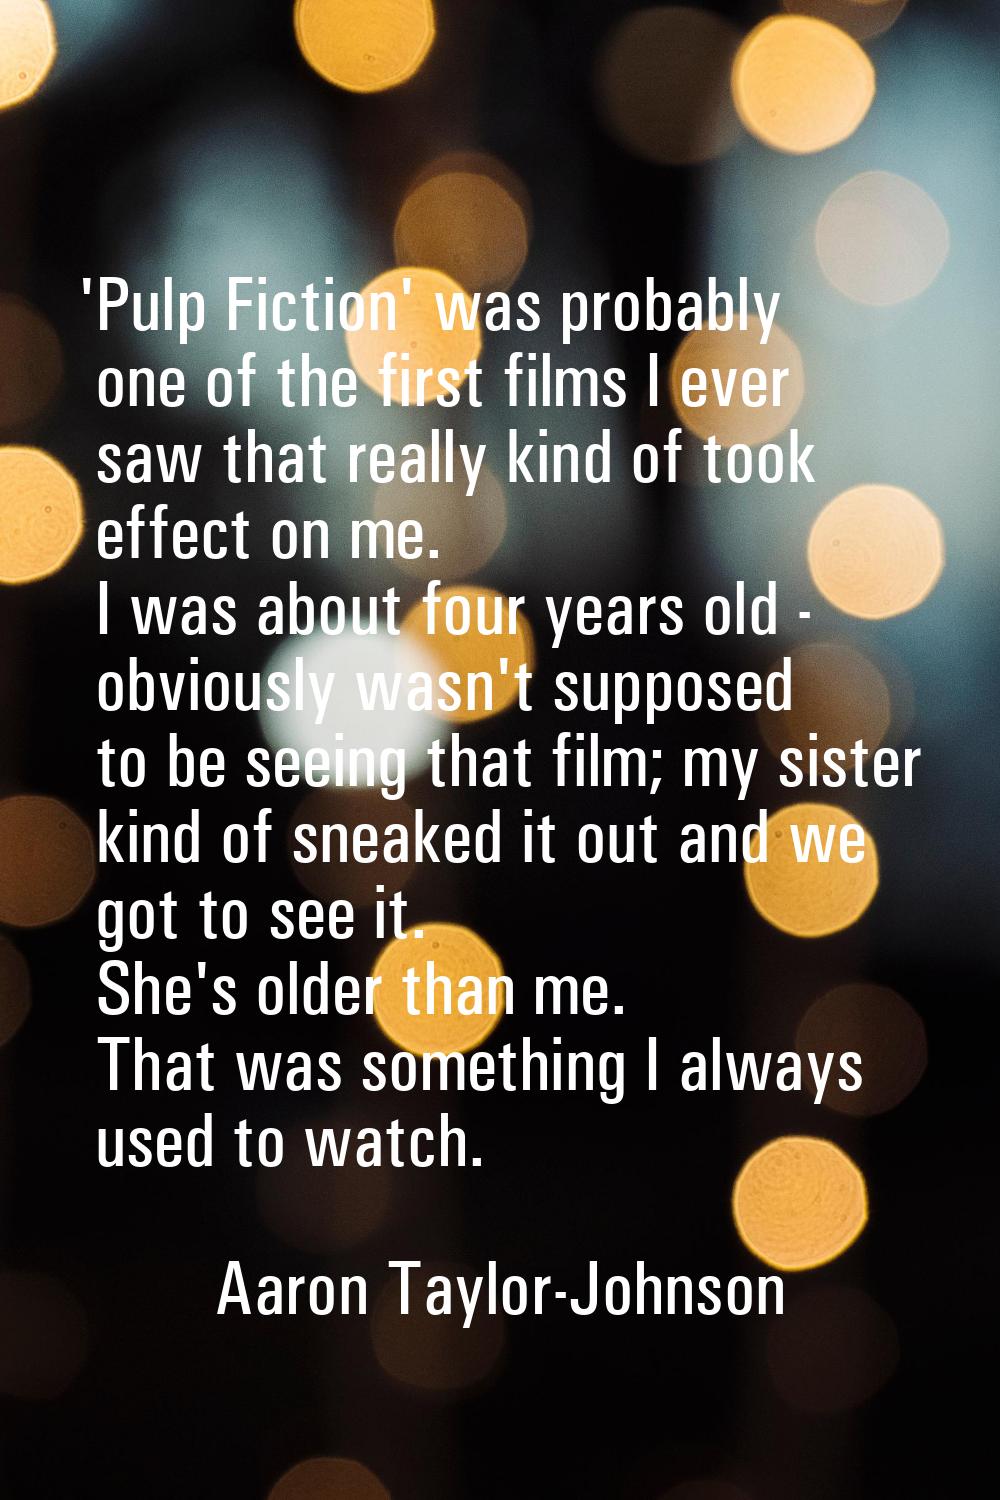 'Pulp Fiction' was probably one of the first films I ever saw that really kind of took effect on me